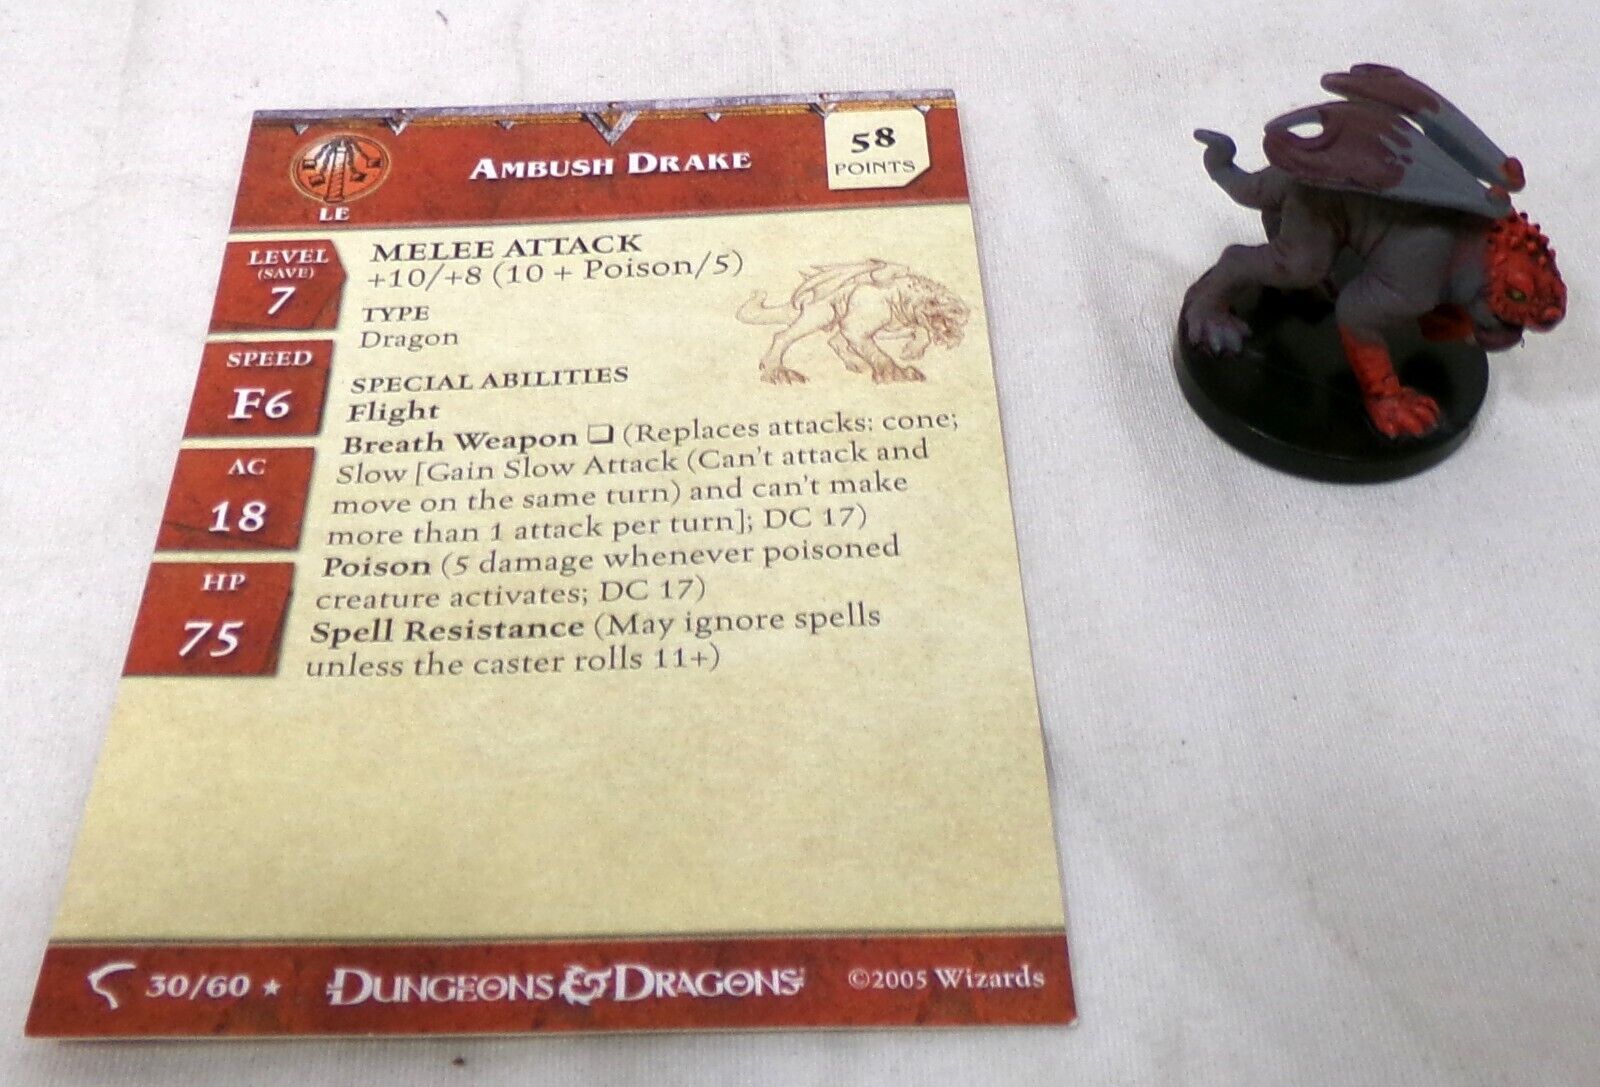 Wizards of the Coast Dungeons & Dragons Deathknell Rare Ambush Drake Miniature